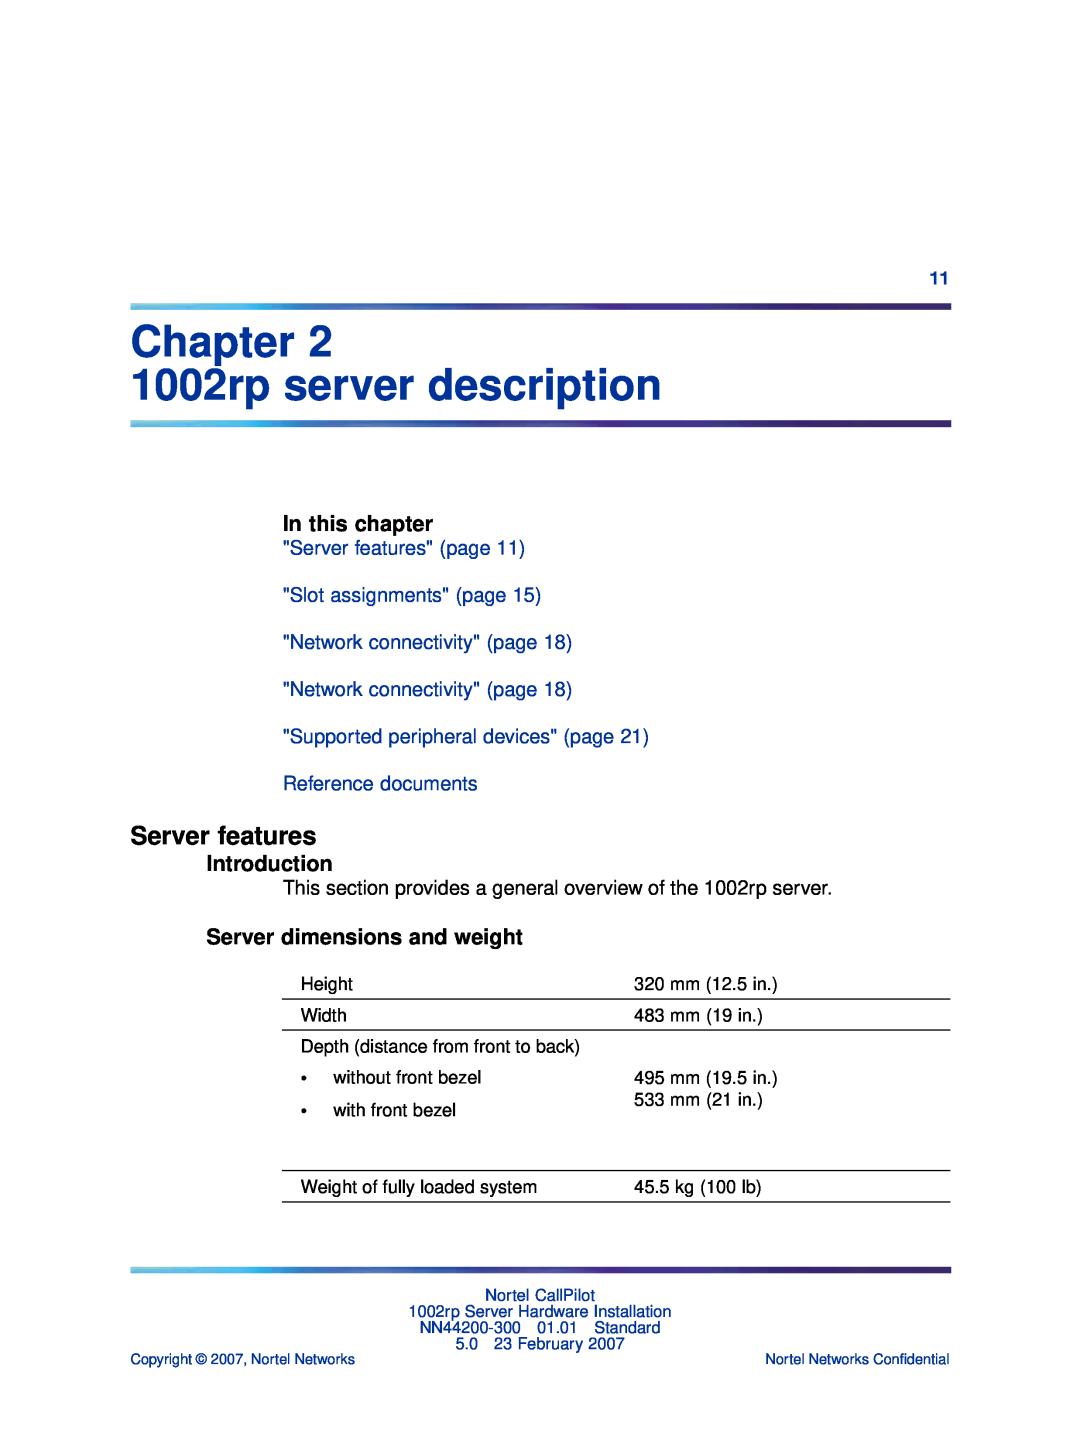 Nortel Networks NN44200-300 manual rp server description, Server features, In this chapter, Introduction 